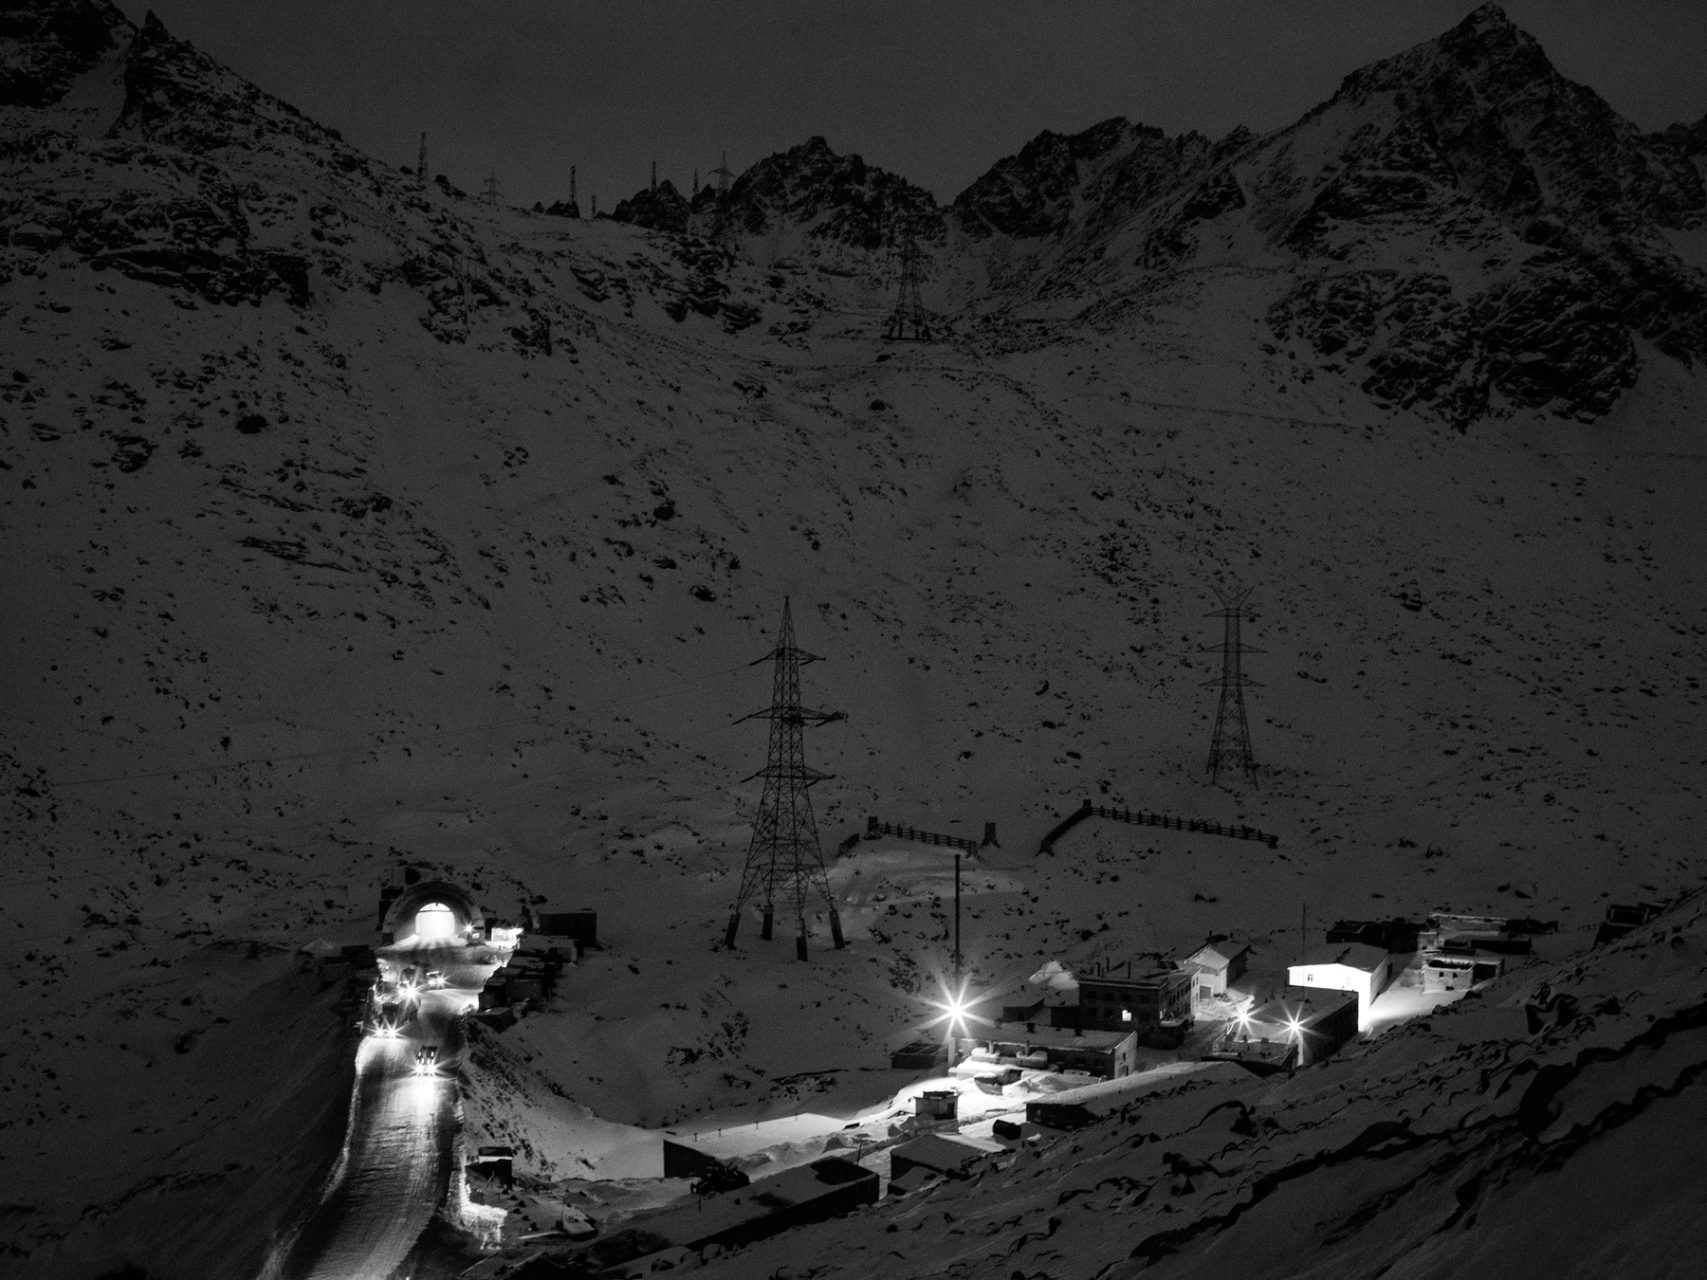 Trucks leave the Northern end of the Salang Tunnel passing the servicing village at 3600m altitude as the dusk sets in.